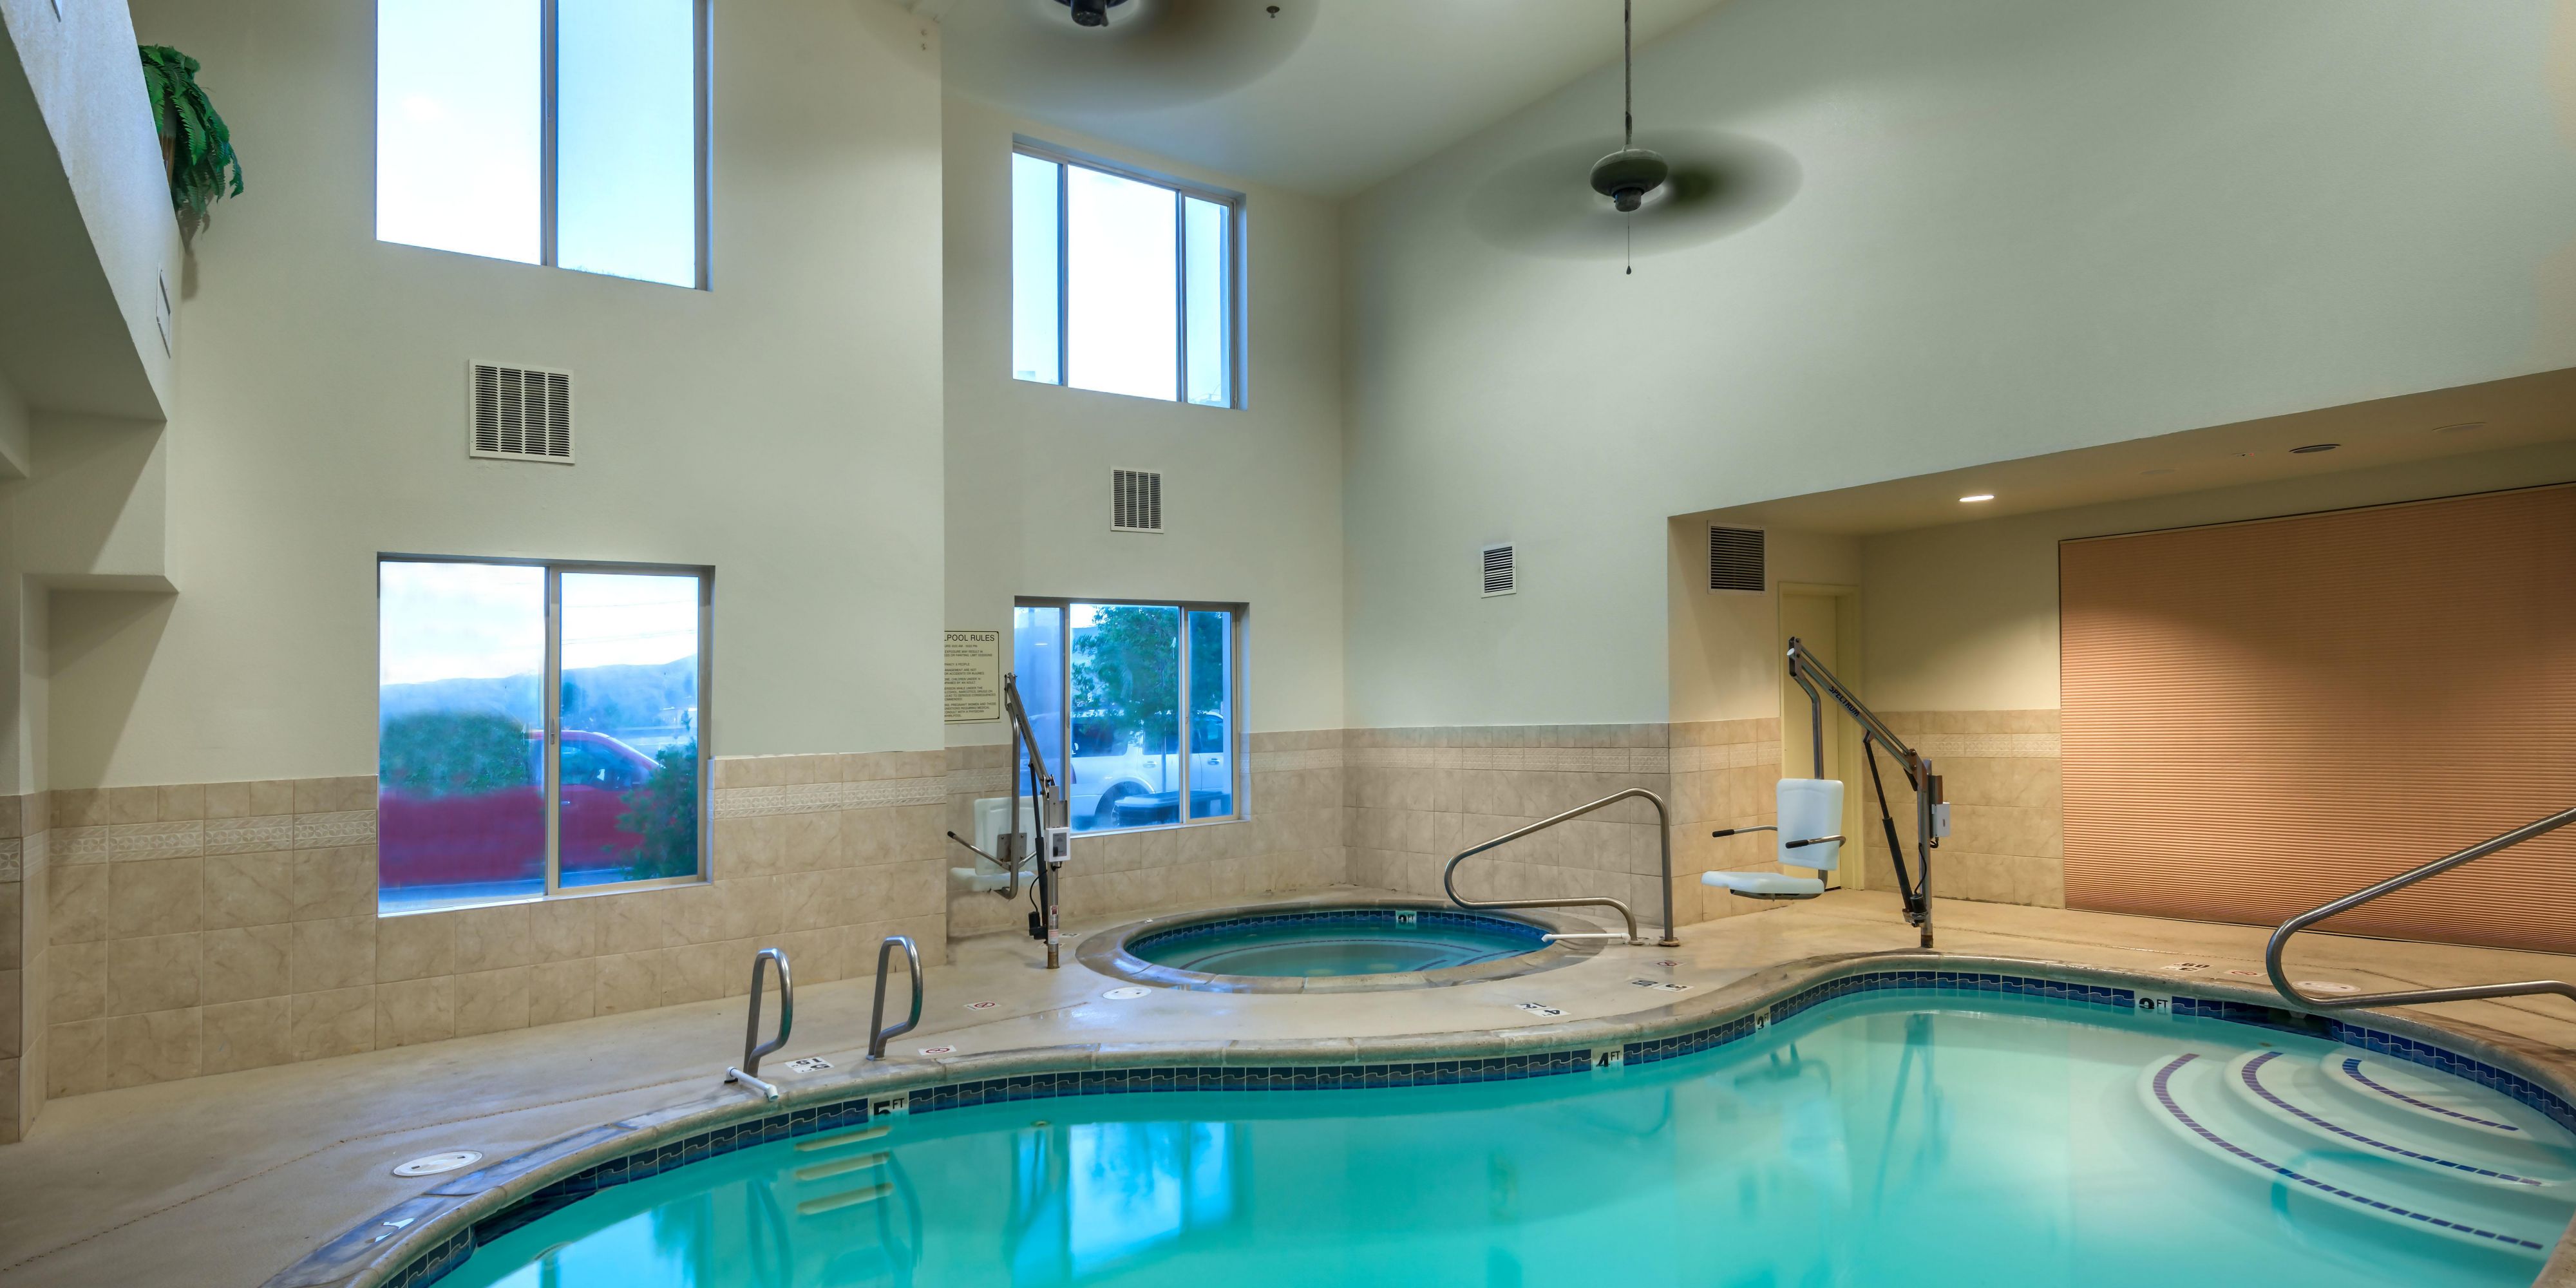 The Holiday Inn Express Carson City has an indoor pool  and whirlpool for your relaxation. 